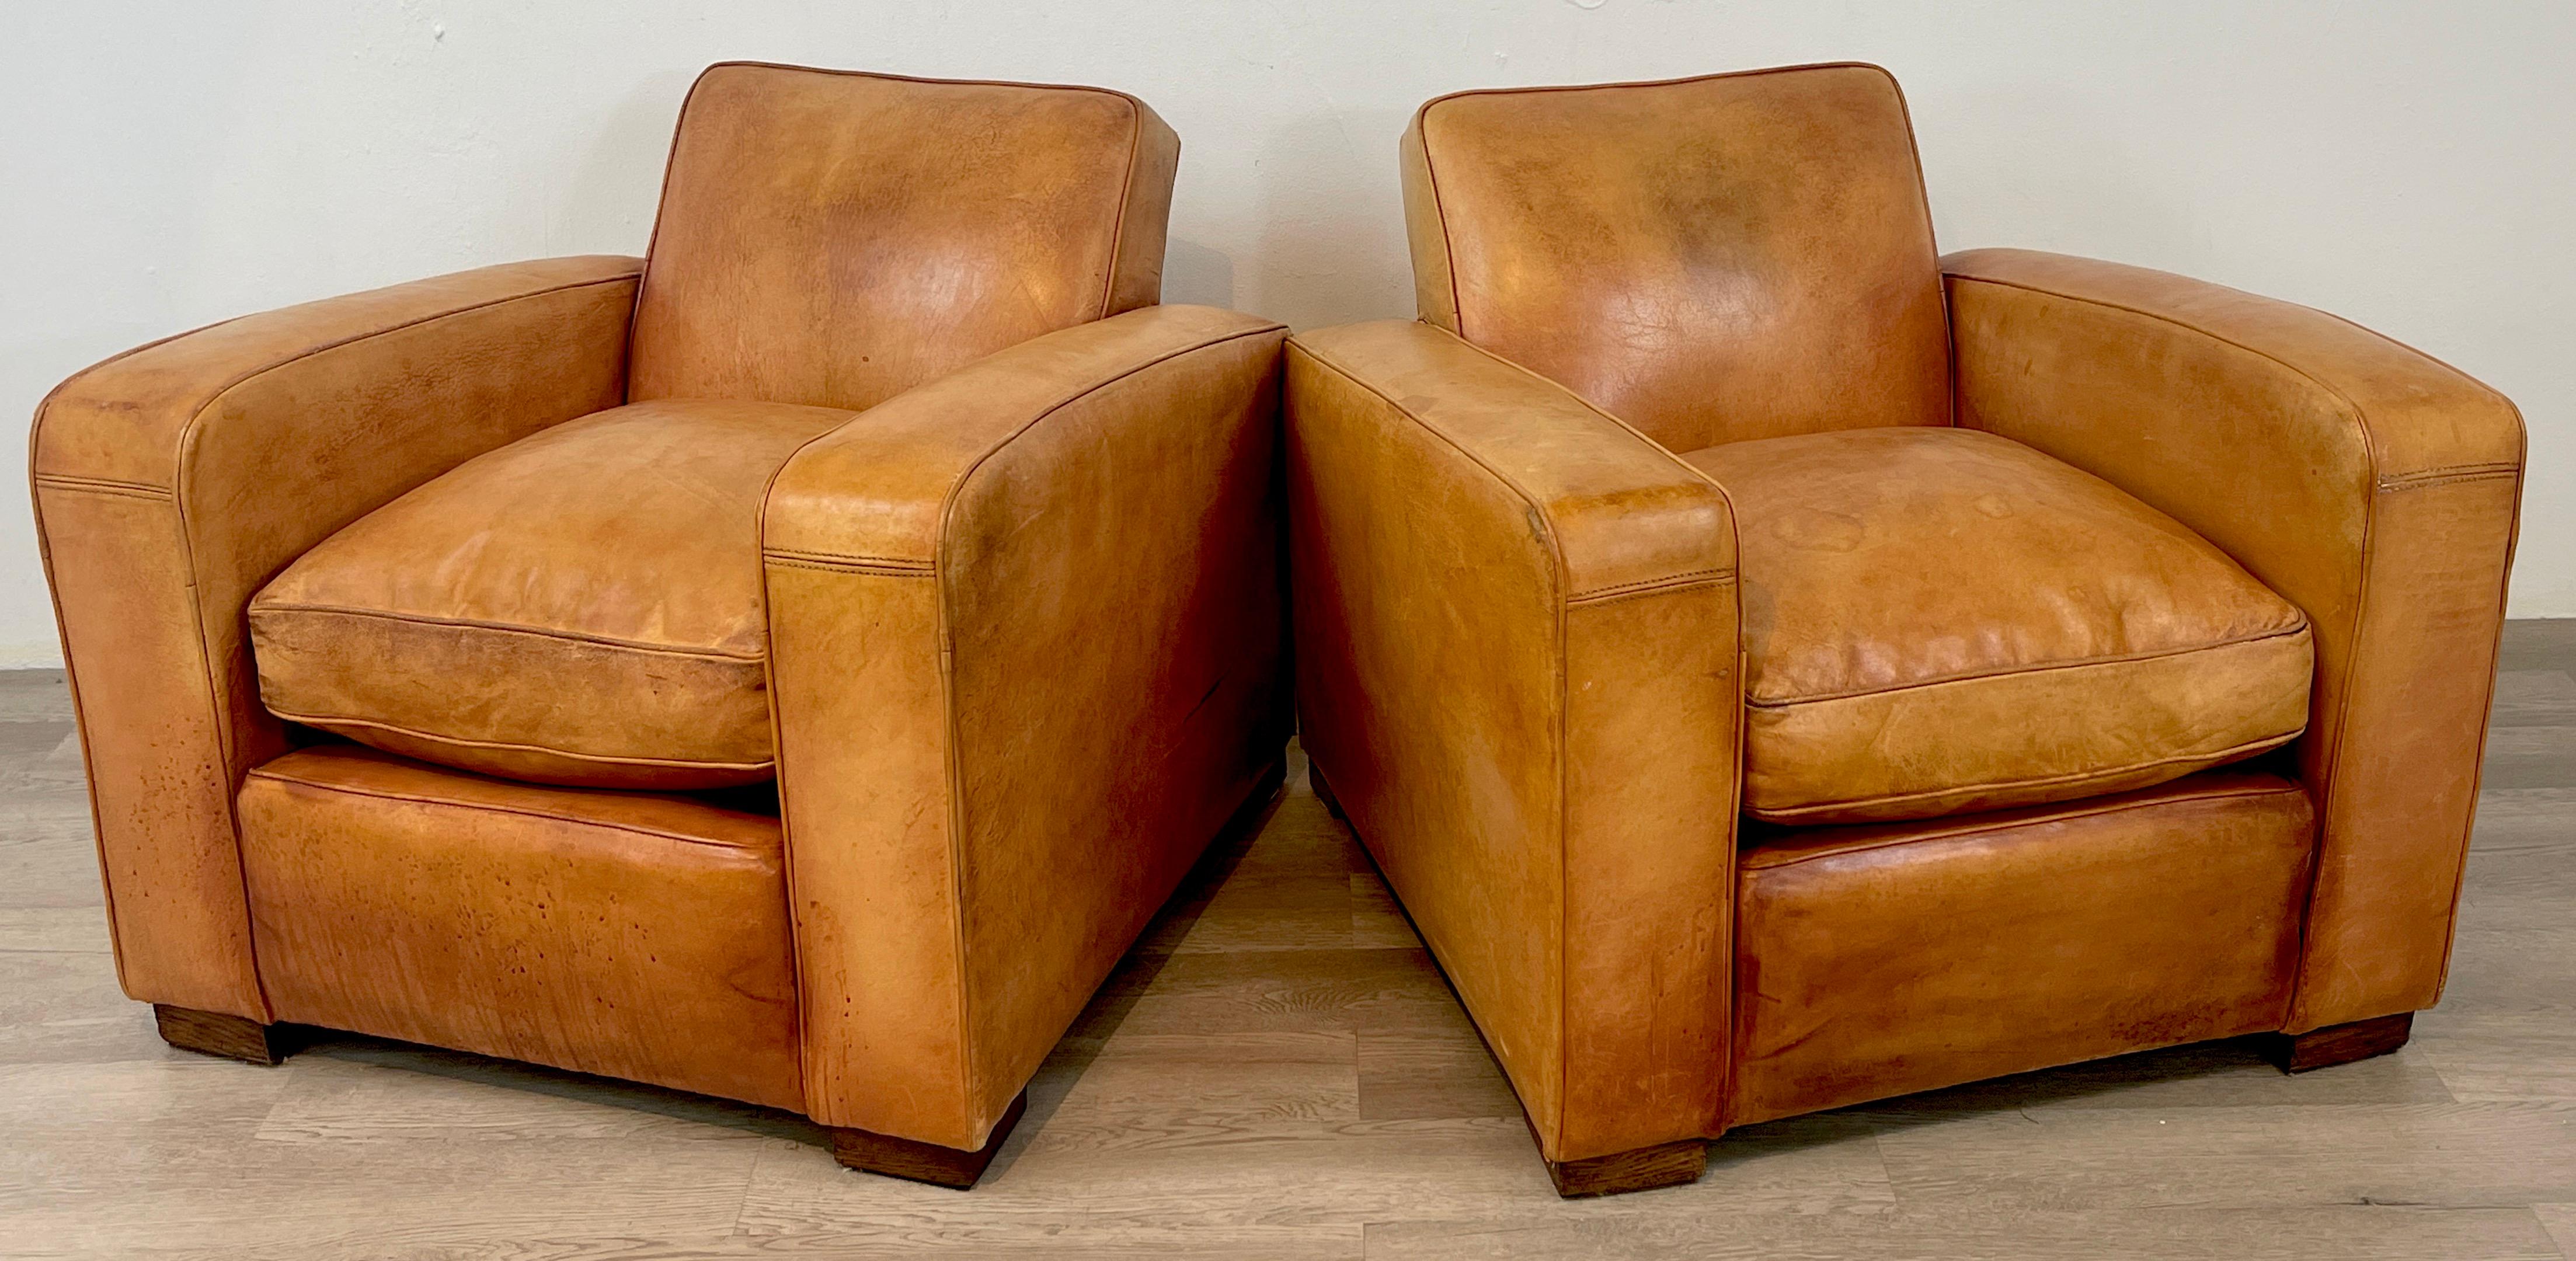 Pair of French Art Deco leather club chairs, beautifully distressed, structurally sound, comfortable. 
Each chair measures 31